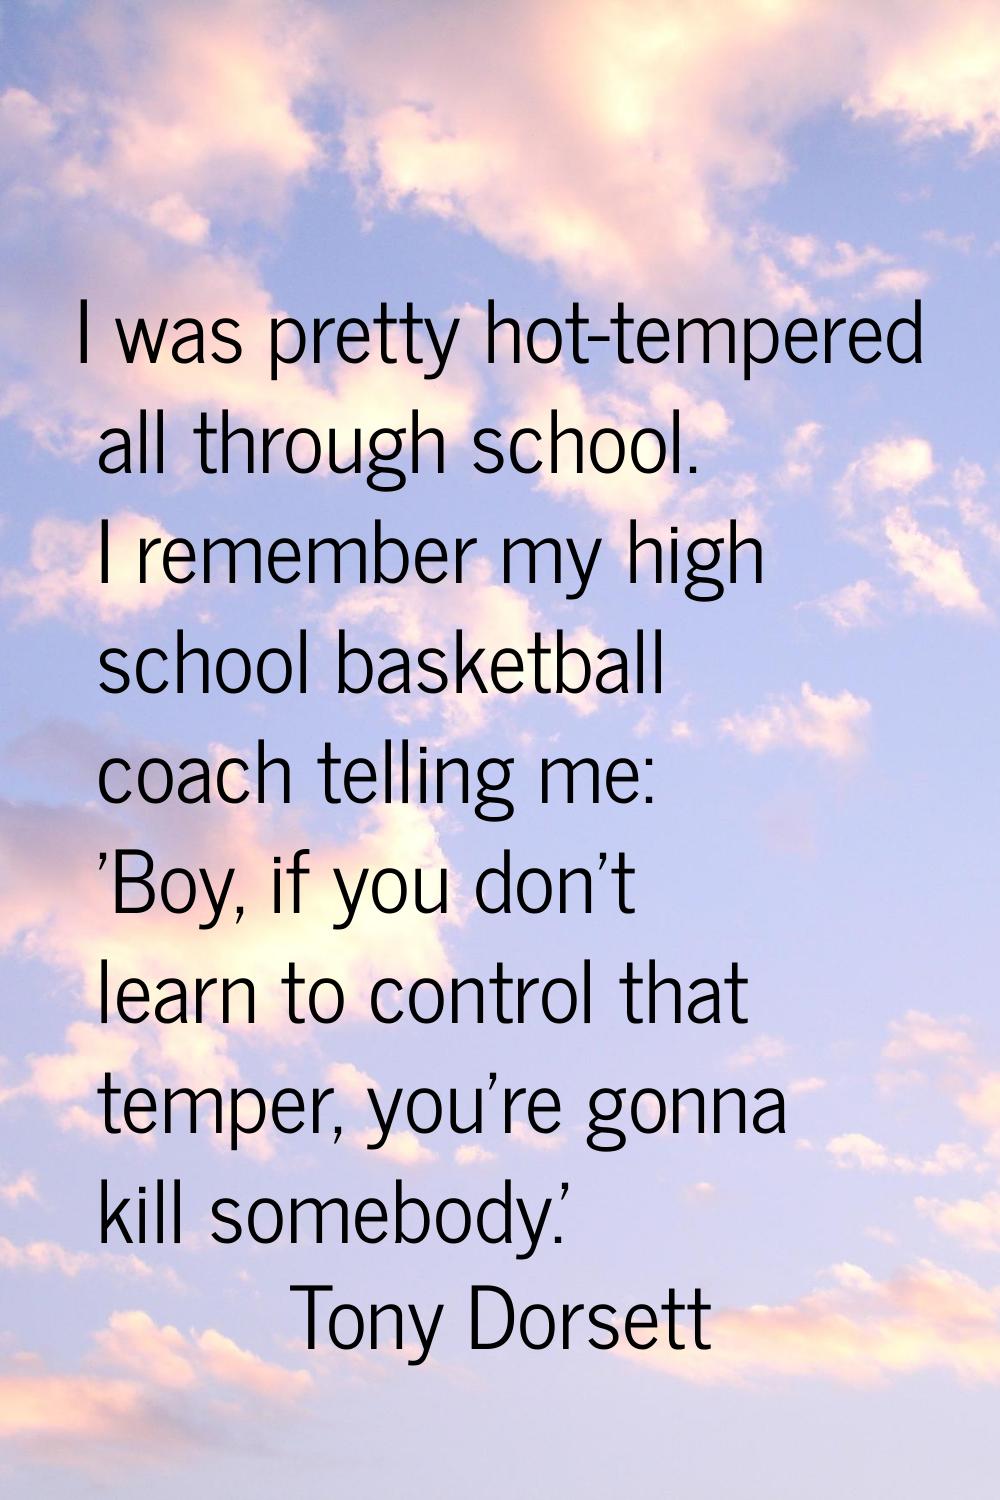 I was pretty hot-tempered all through school. I remember my high school basketball coach telling me